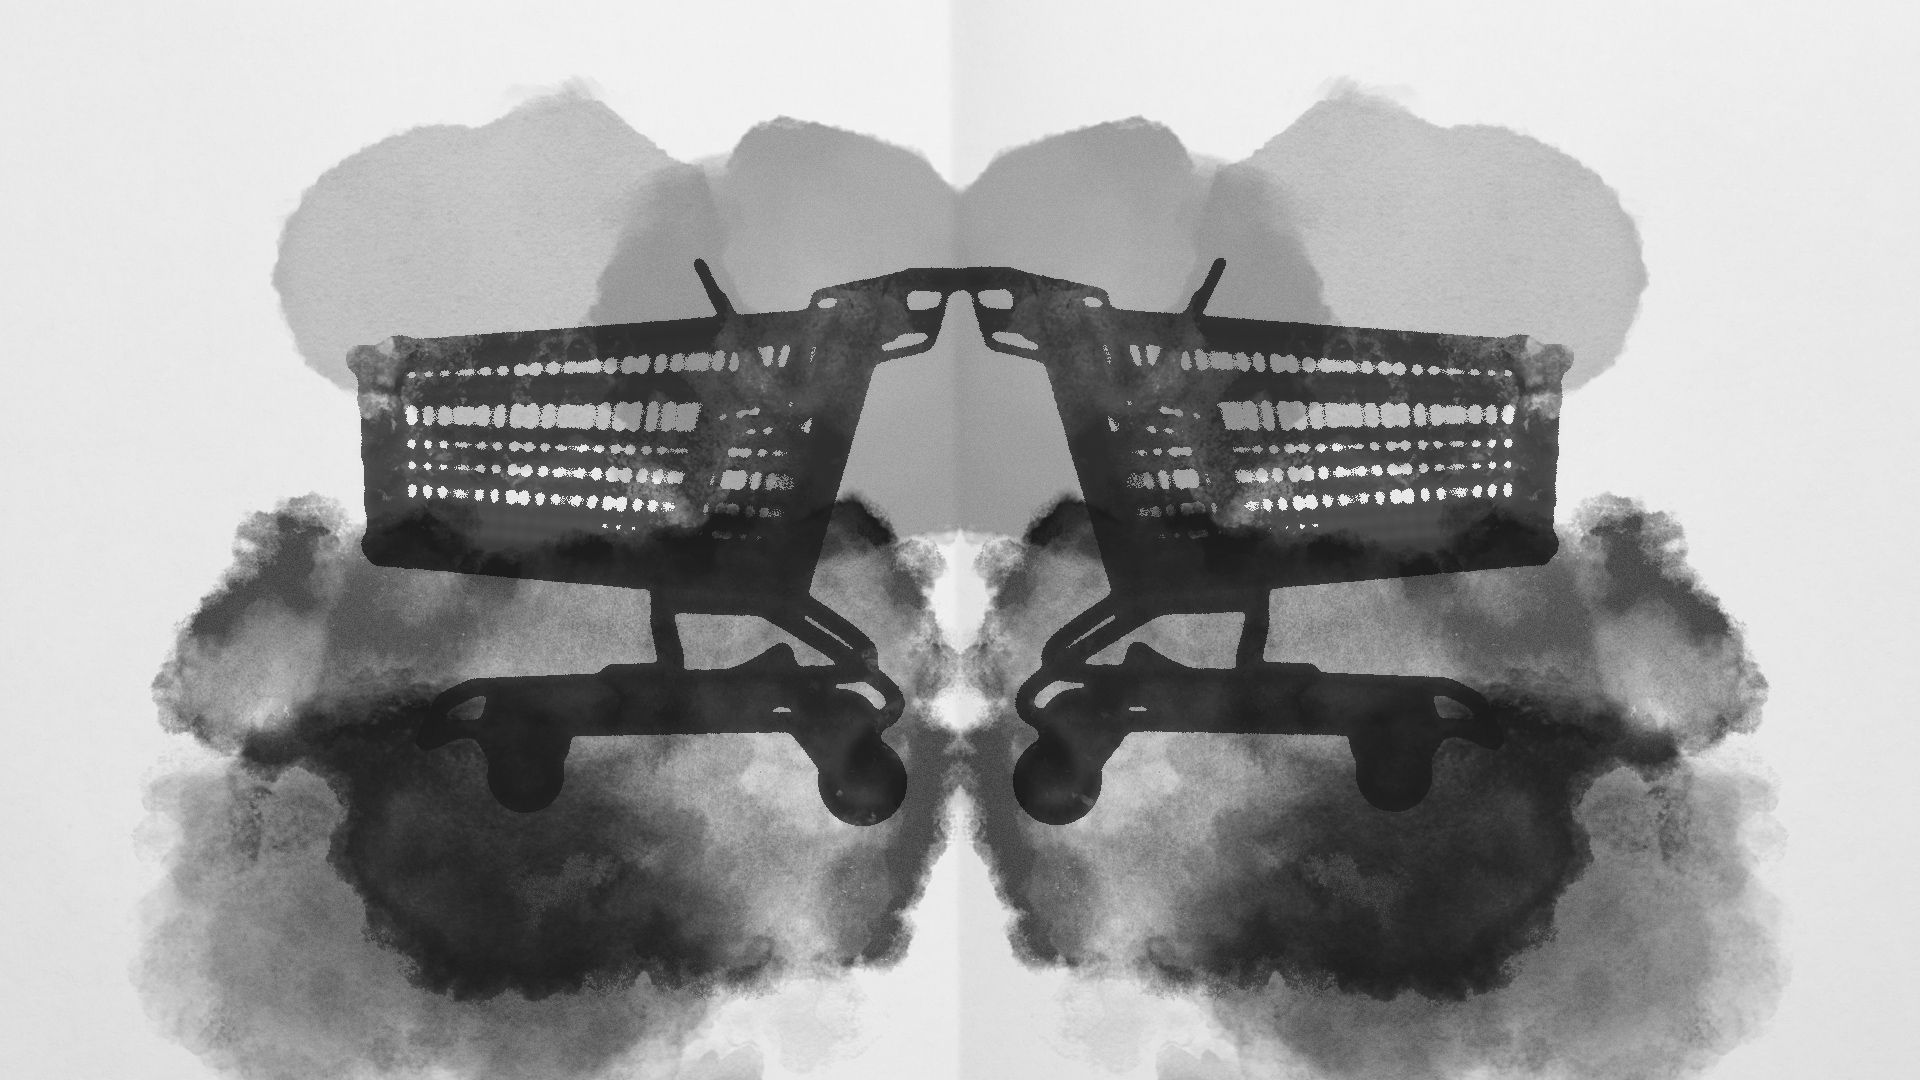 Illustration of a Rorschach inkblot showing shopping carts reflected on either side.